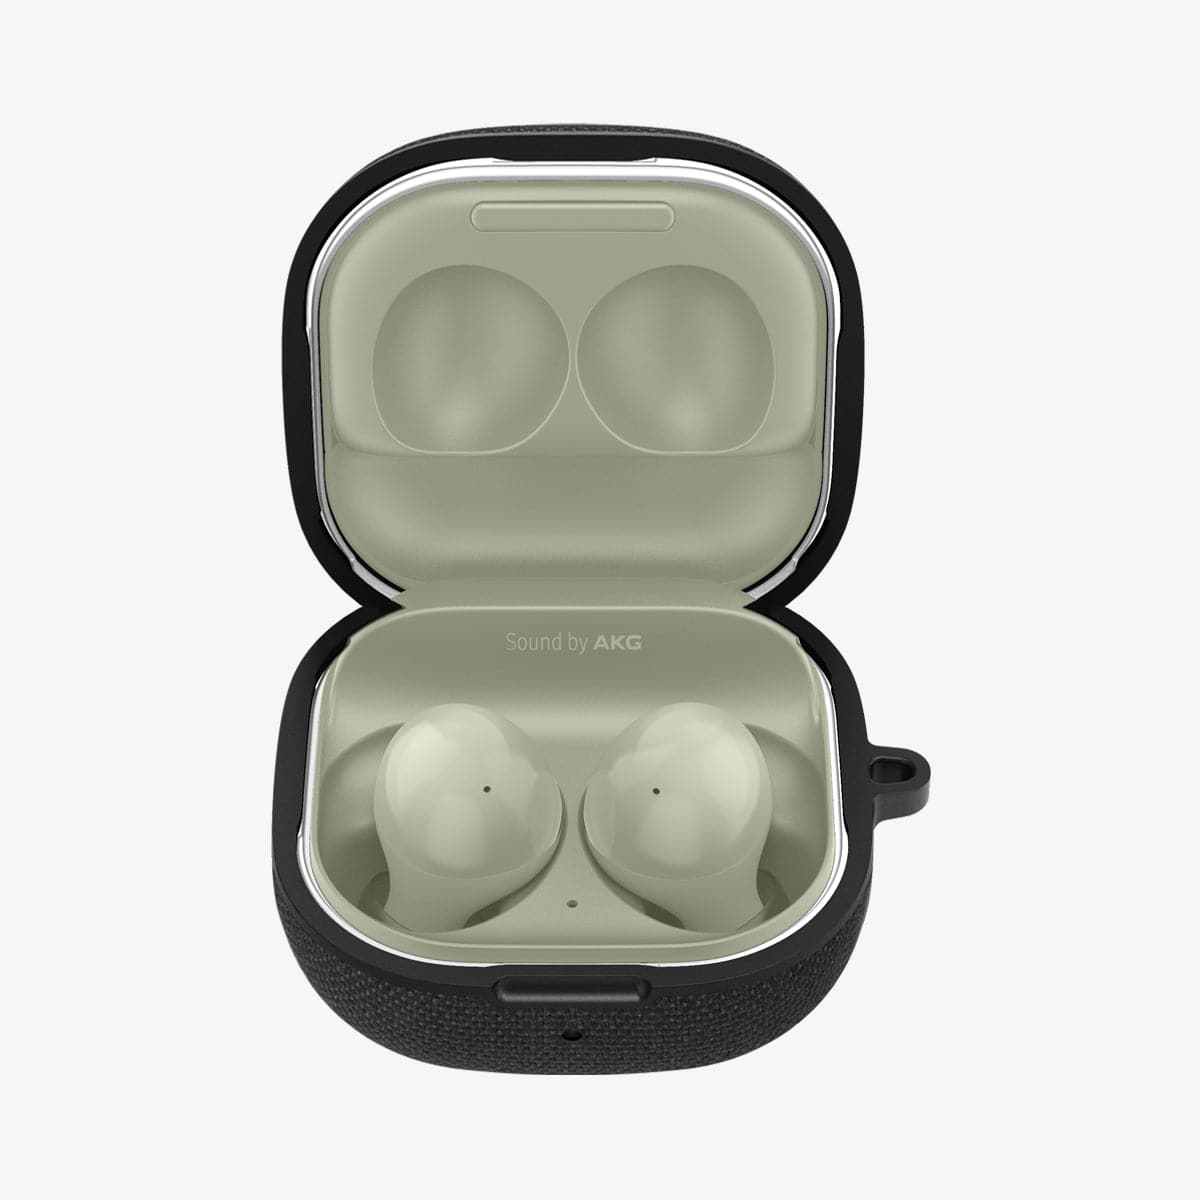 ASD01278 - Galaxy Buds 2 Pro / 2 / Pro / Live Case Urban Fit in black showing the front with top open and earbuds inside